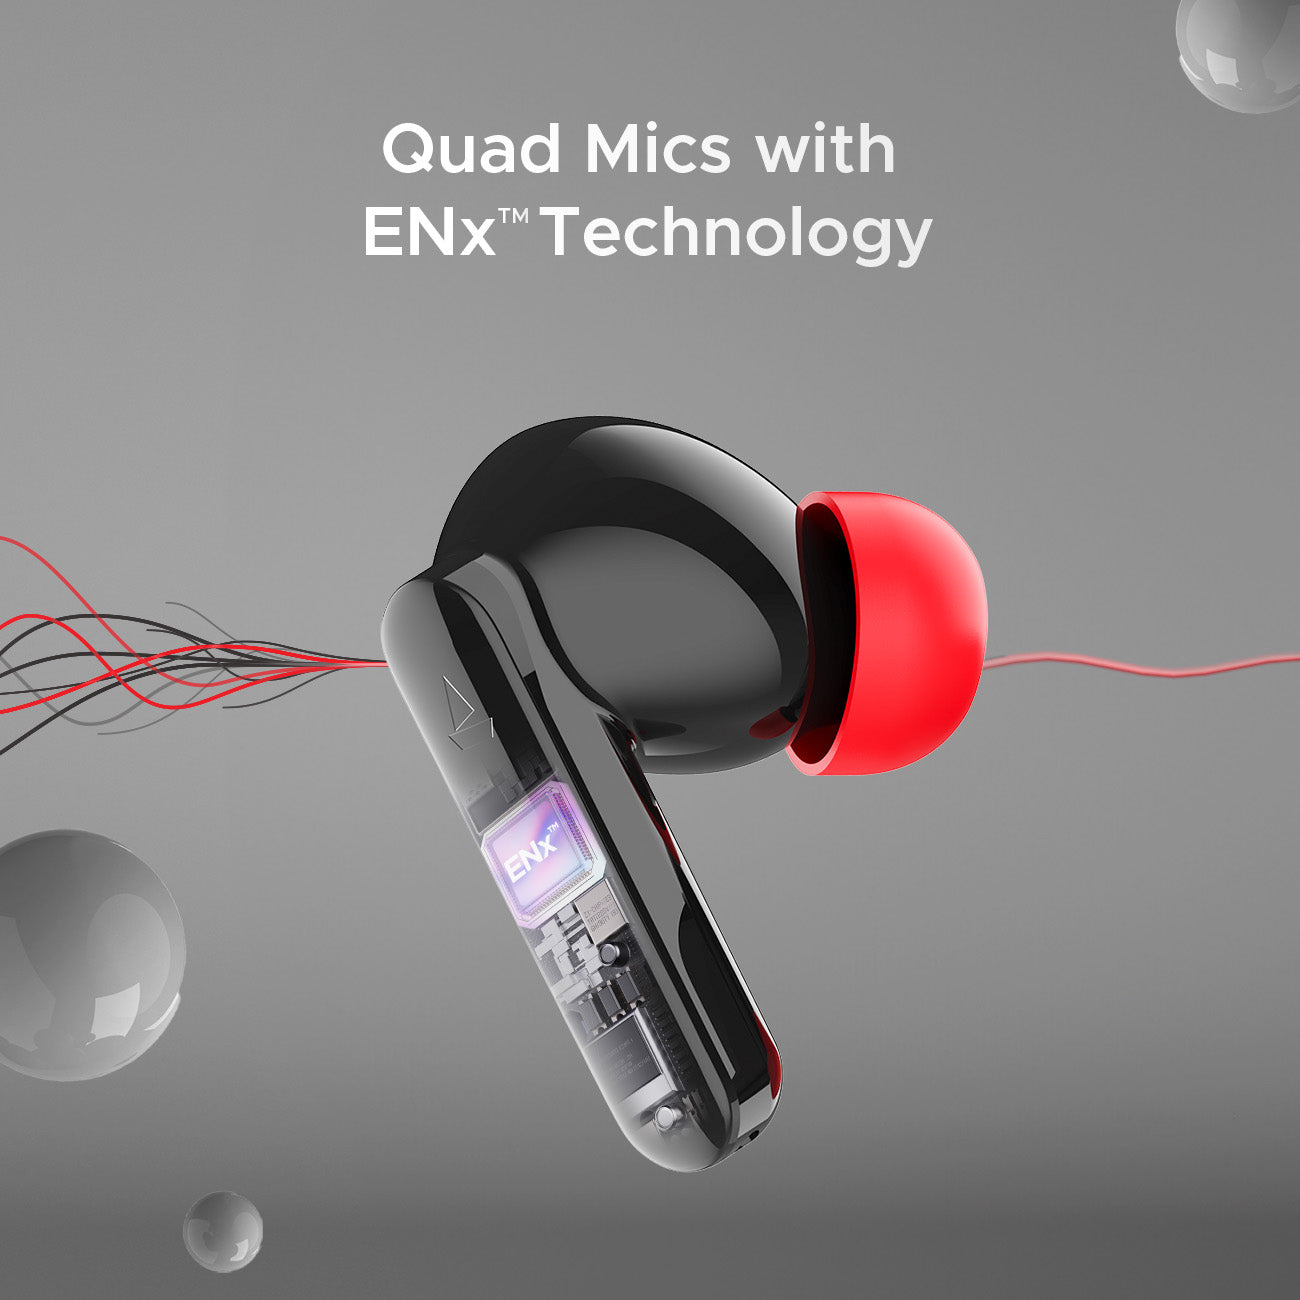 boAt Airdopes Ultra Plus | Wireless Earbuds with 50 Hours Playback, BEAST™ Mode, Quad Mics with ENx™ Tech, IWP™ Technology